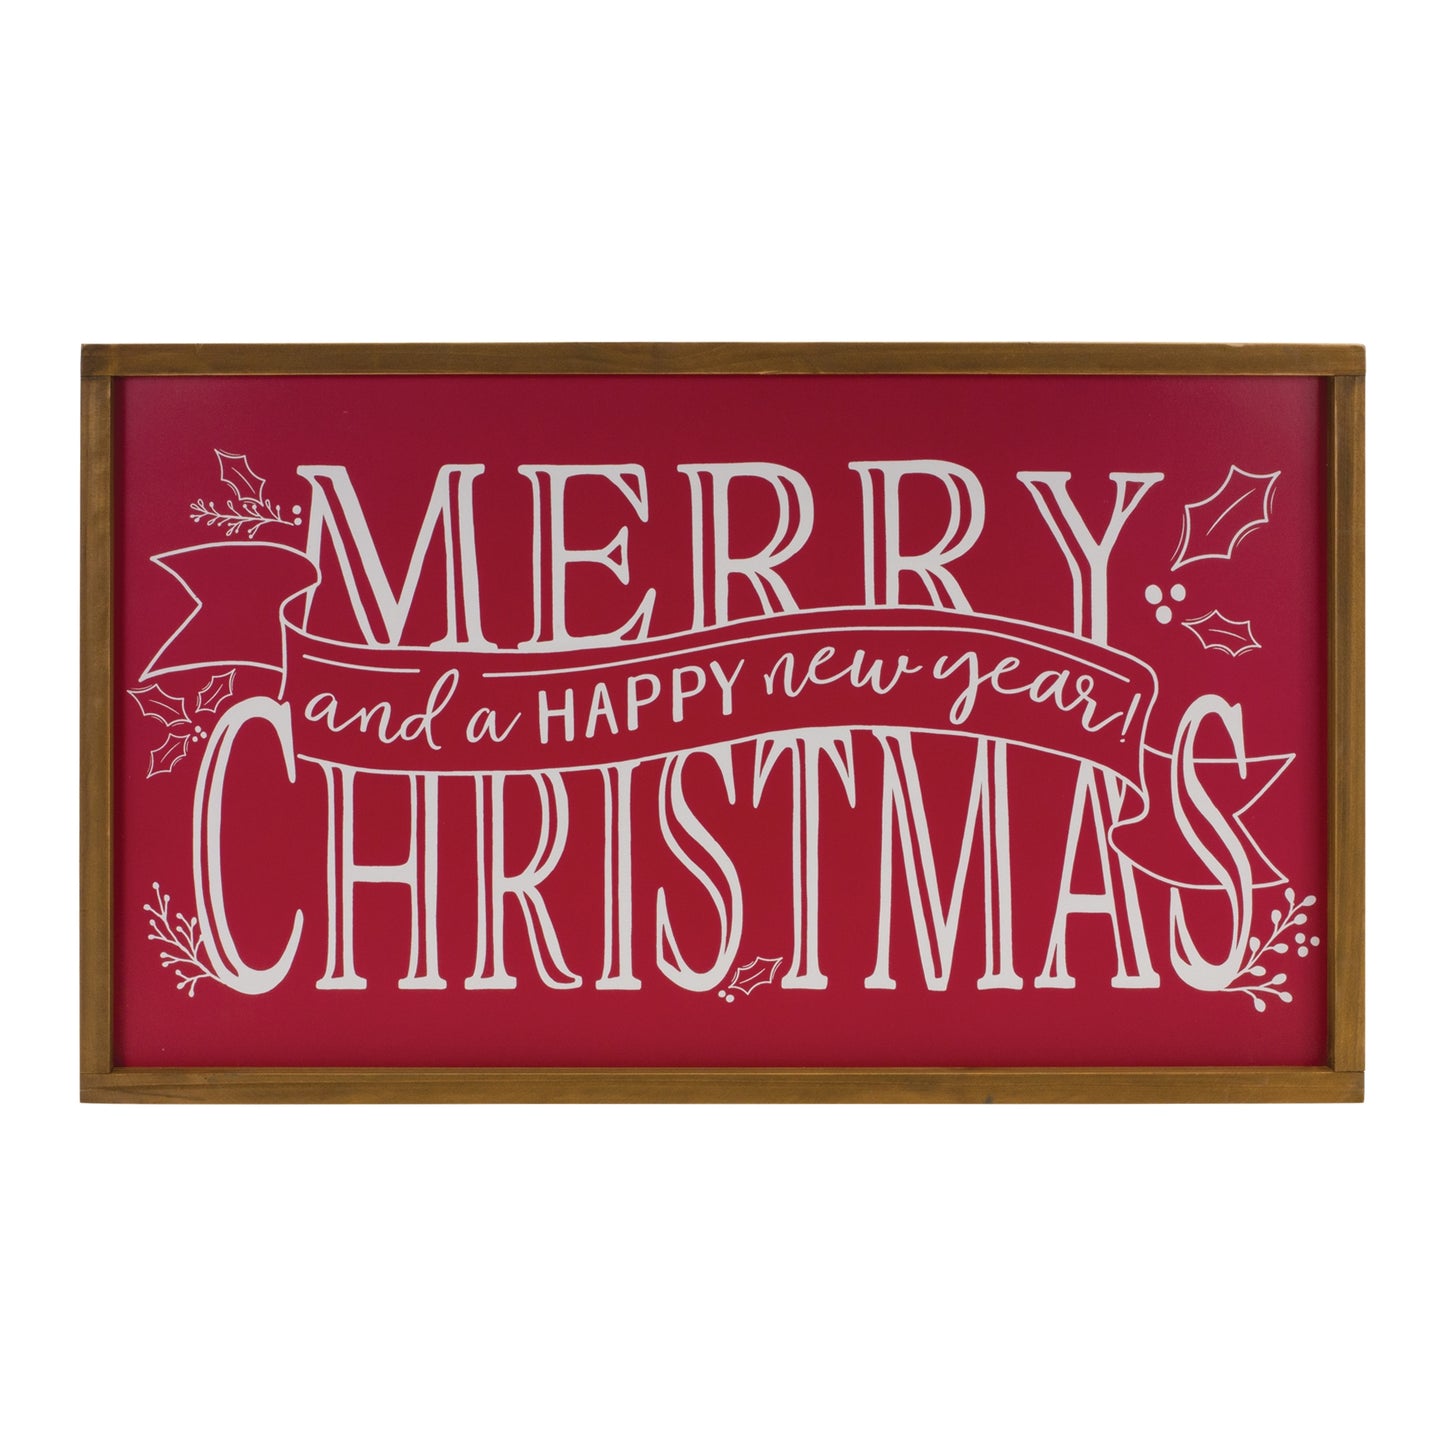 Merry Christmas and Happy New Year Sign 23.75"L